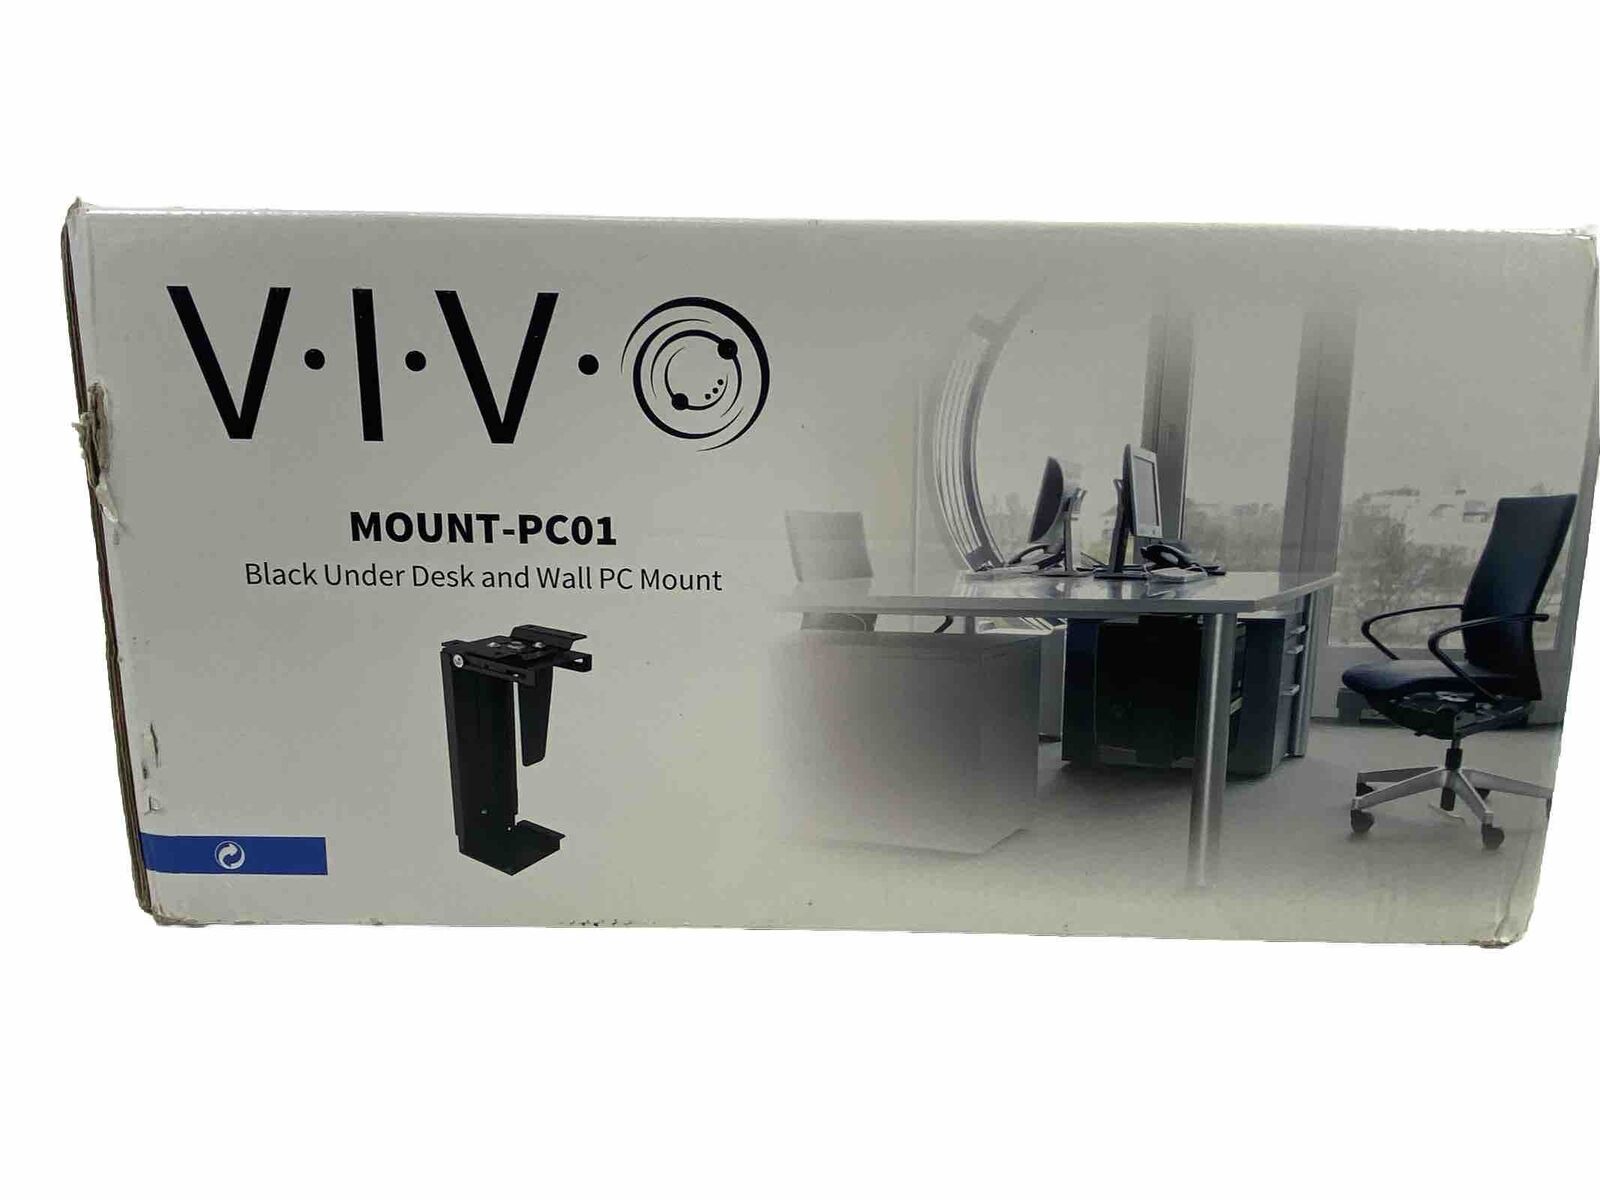 Vivo MOUNT PC01 BKACK UNDER DESK AND WALL PC MOUNT